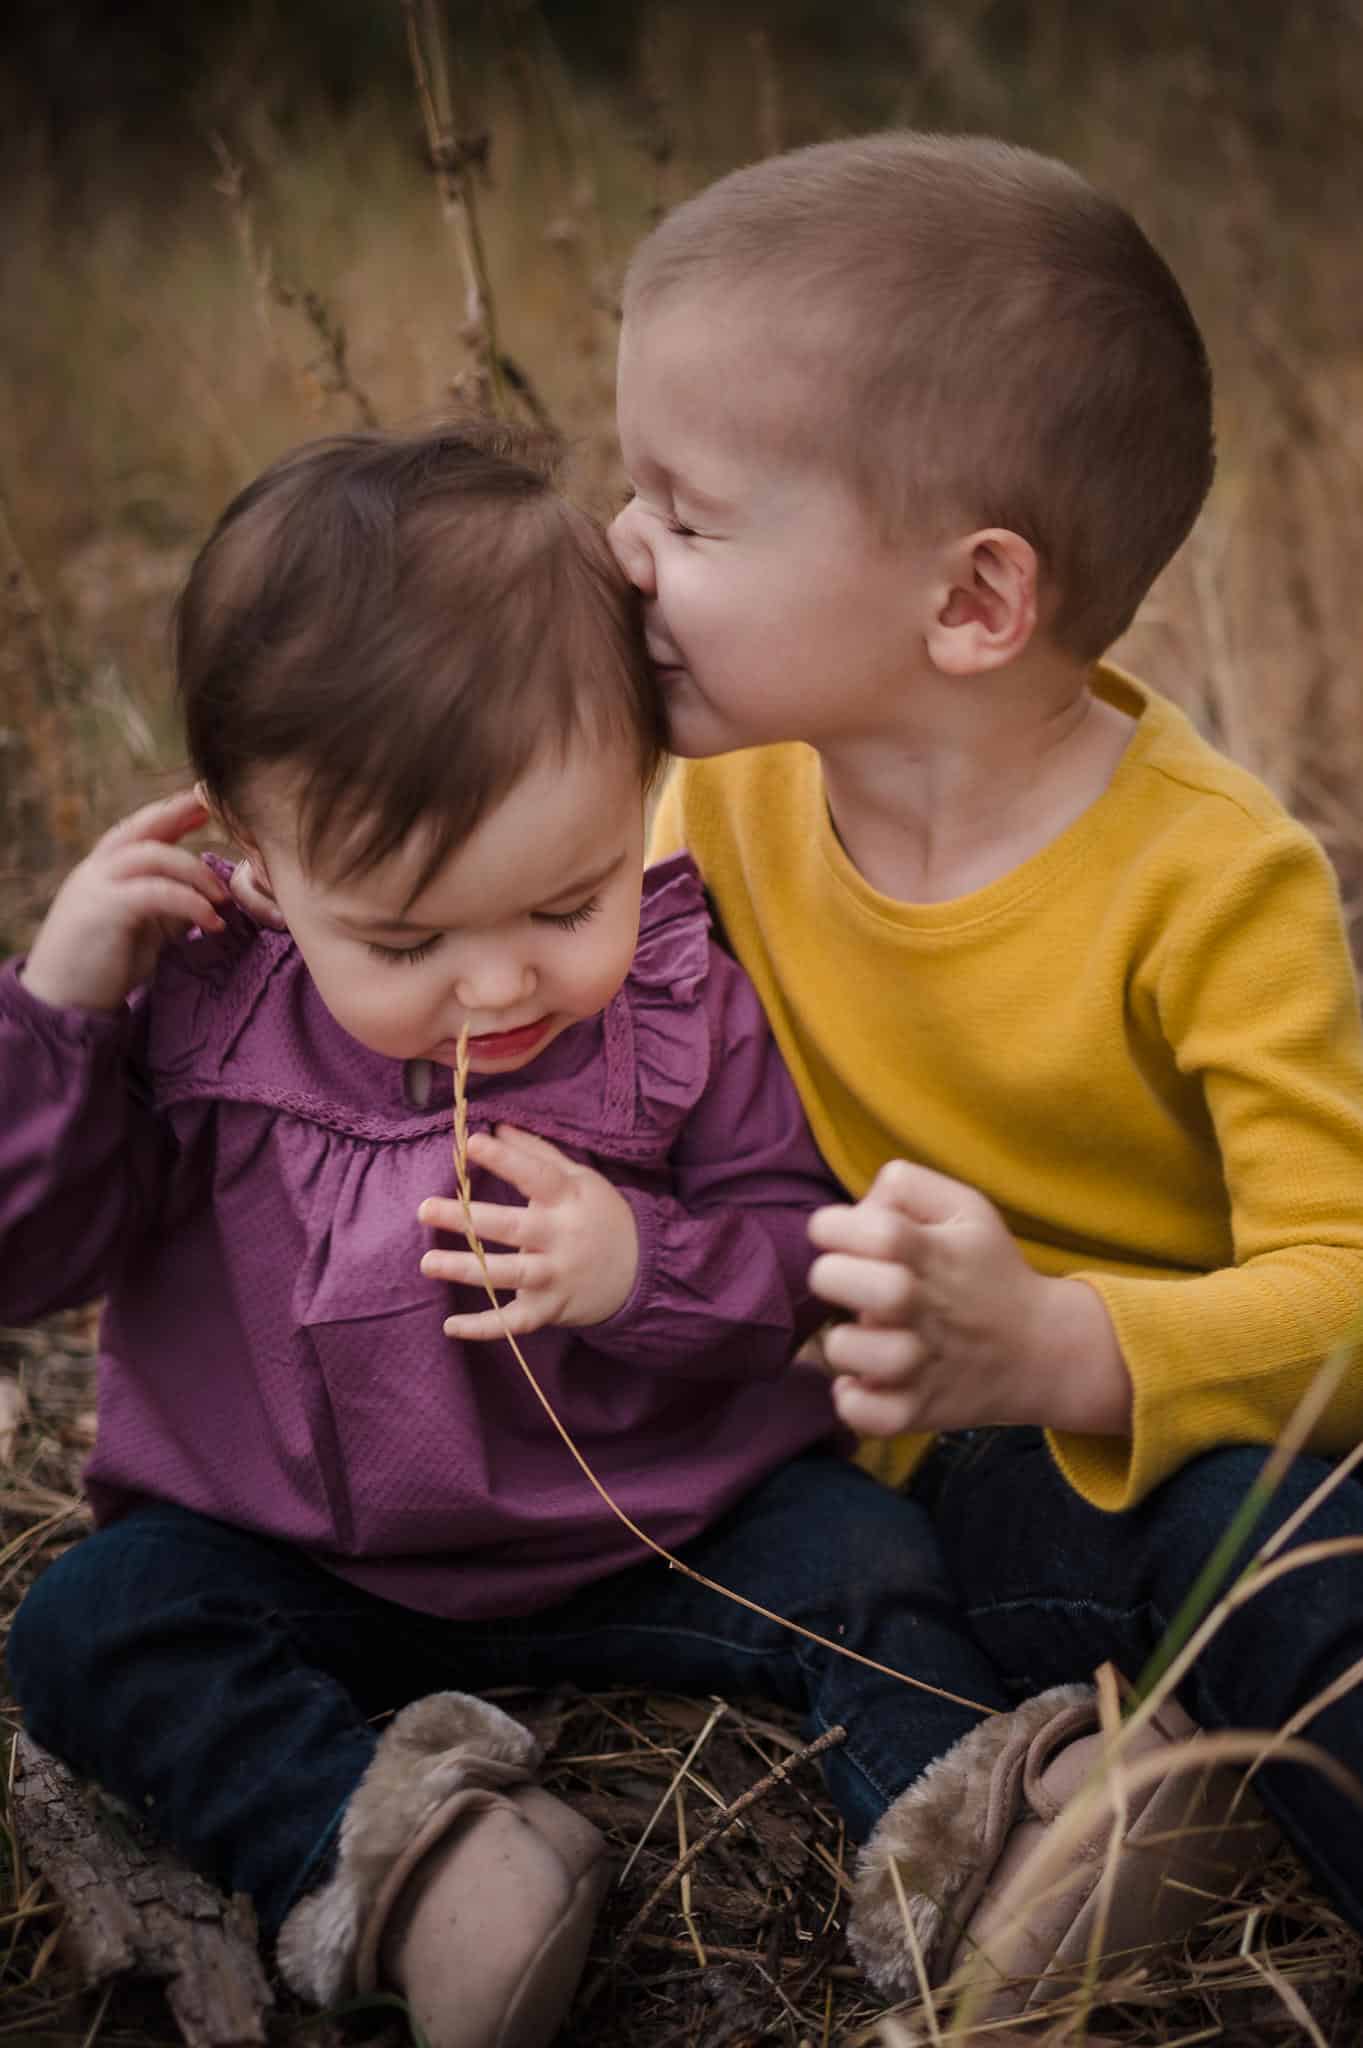 A young boy awkwardly kisses his toddler sister as they sit in the grass and play together.